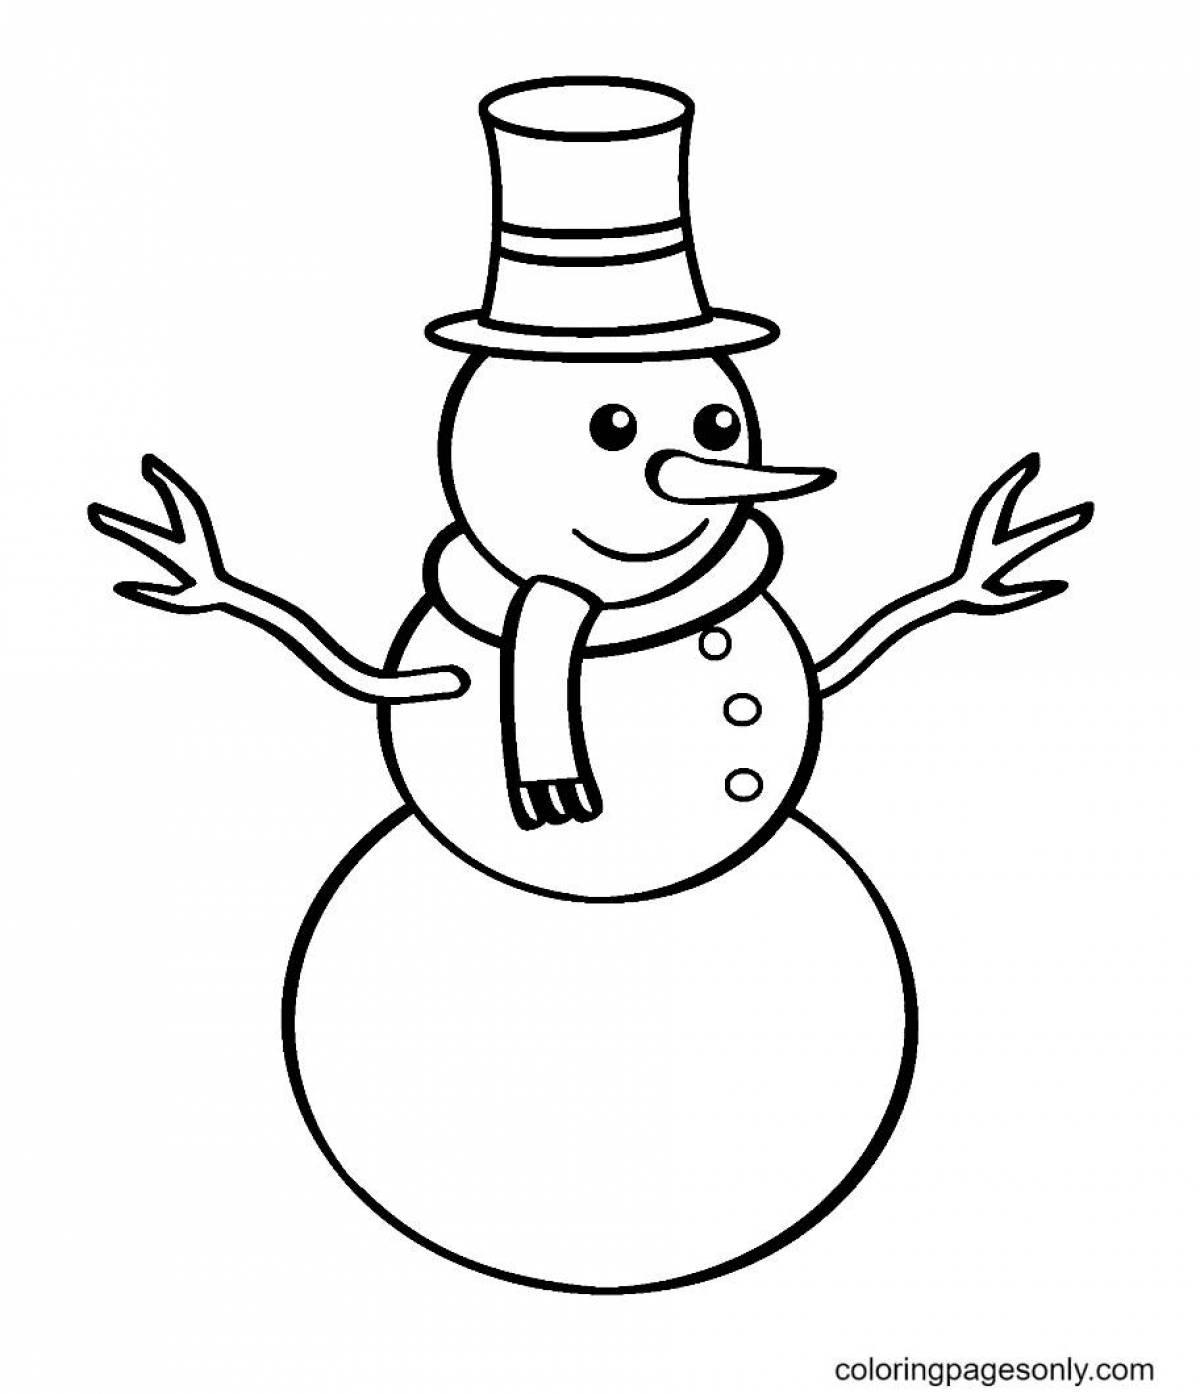 Coloring book with bright eyes snowman